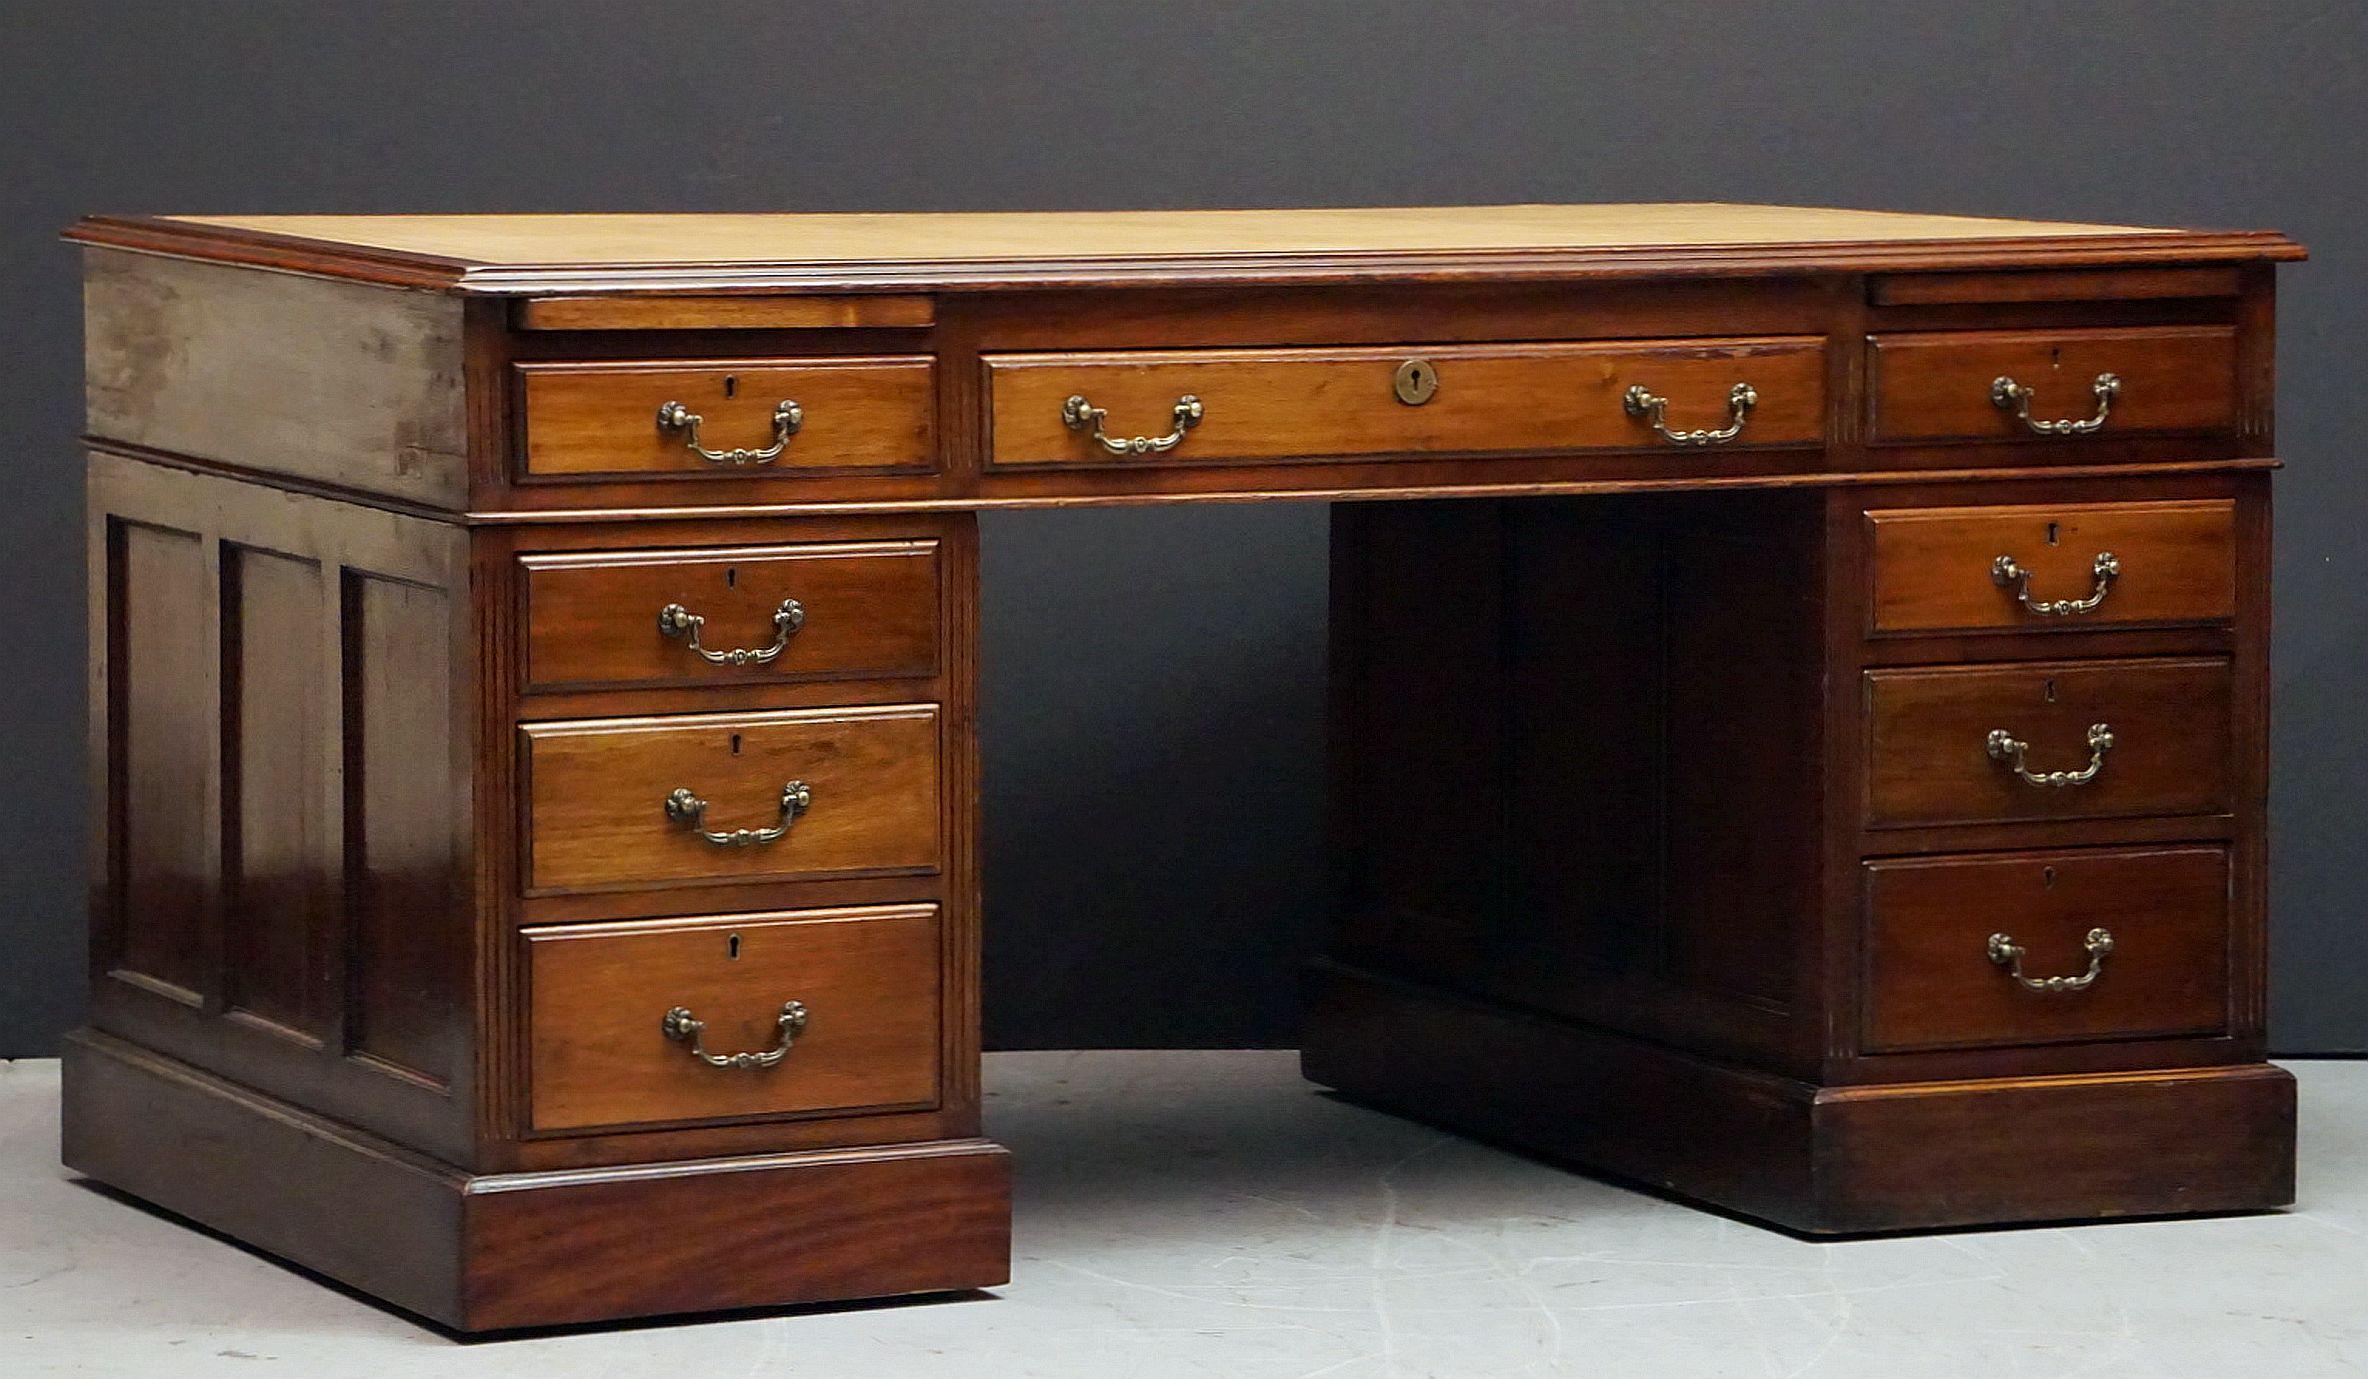 A handsome large English partner's desk of mahogany, featuring a moulded top inset with an embossed cream leather, over a frieze with one long drawer flanked by two short drawers, with two pull-out slides above each short drawer. 
Resting on two